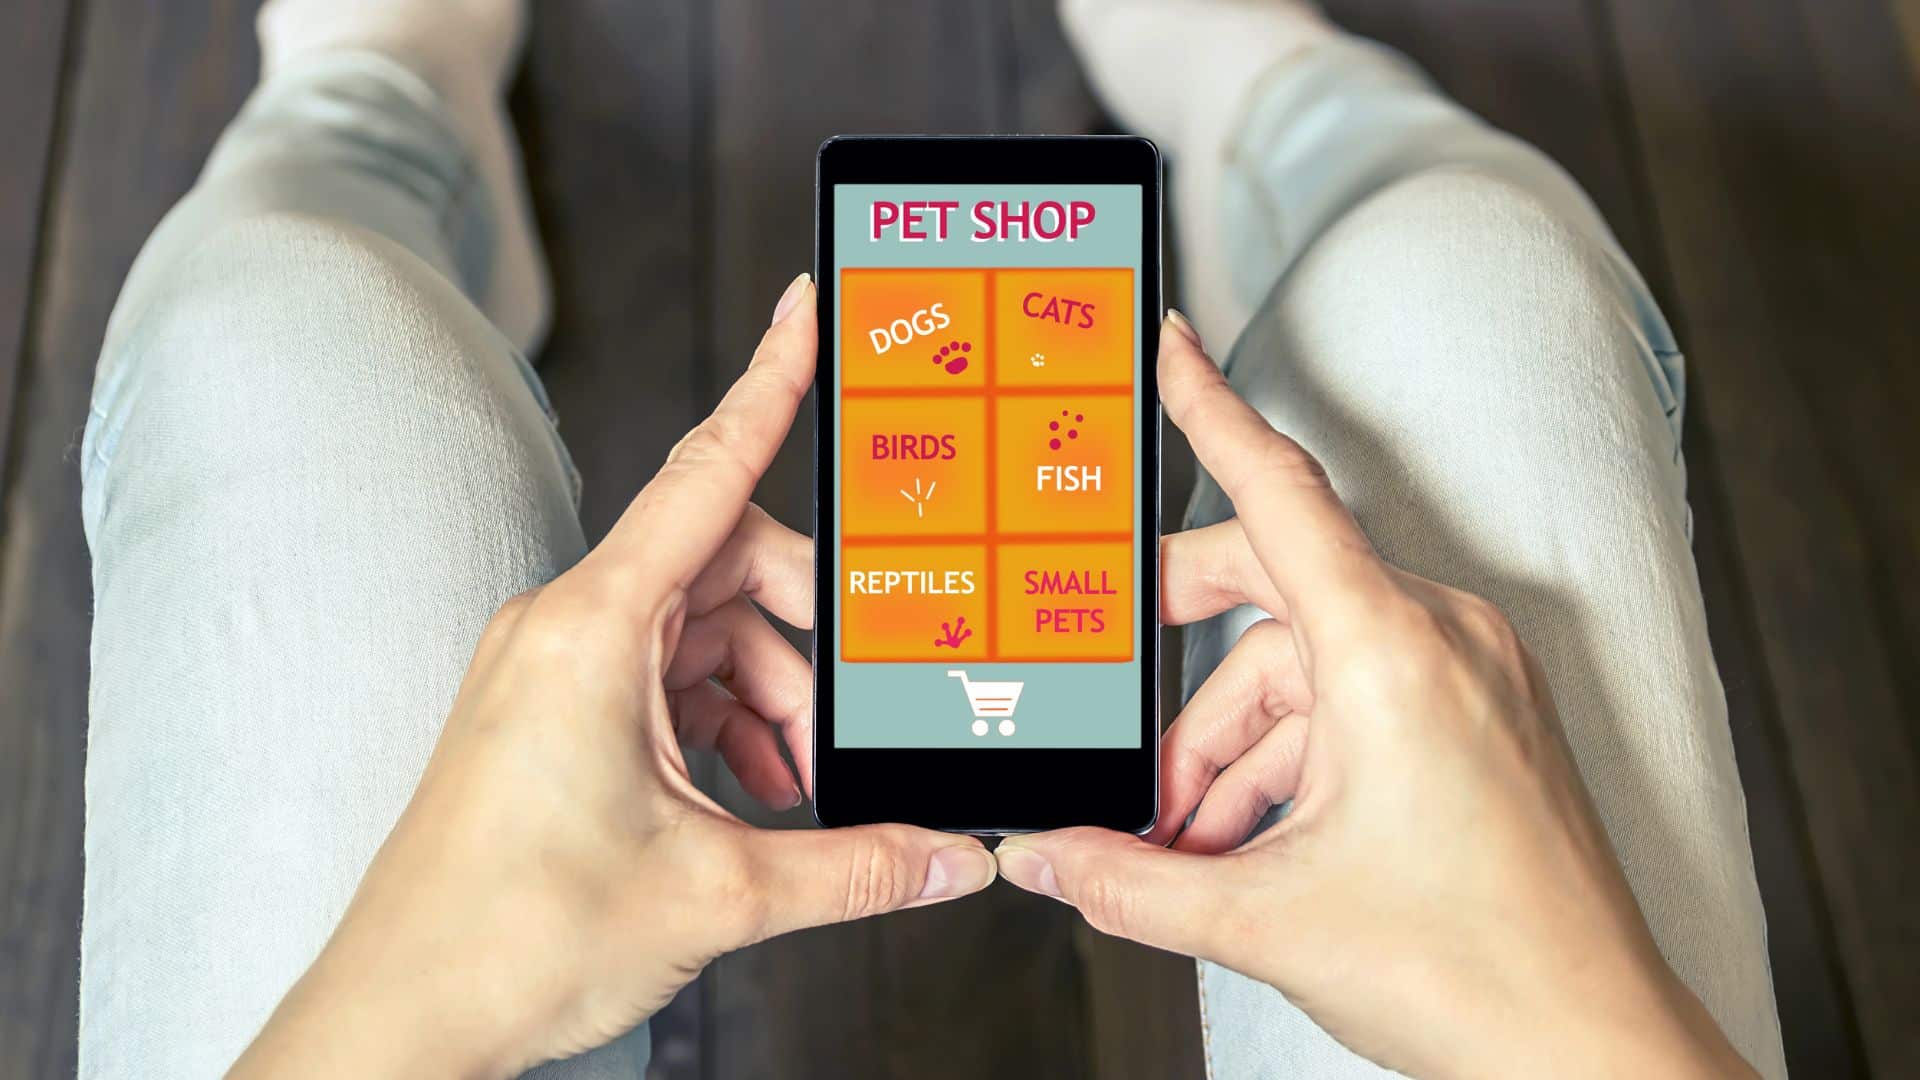 A top down, close up image of someone holding their phone. On the phone screen is a menu for an online pet shop business.